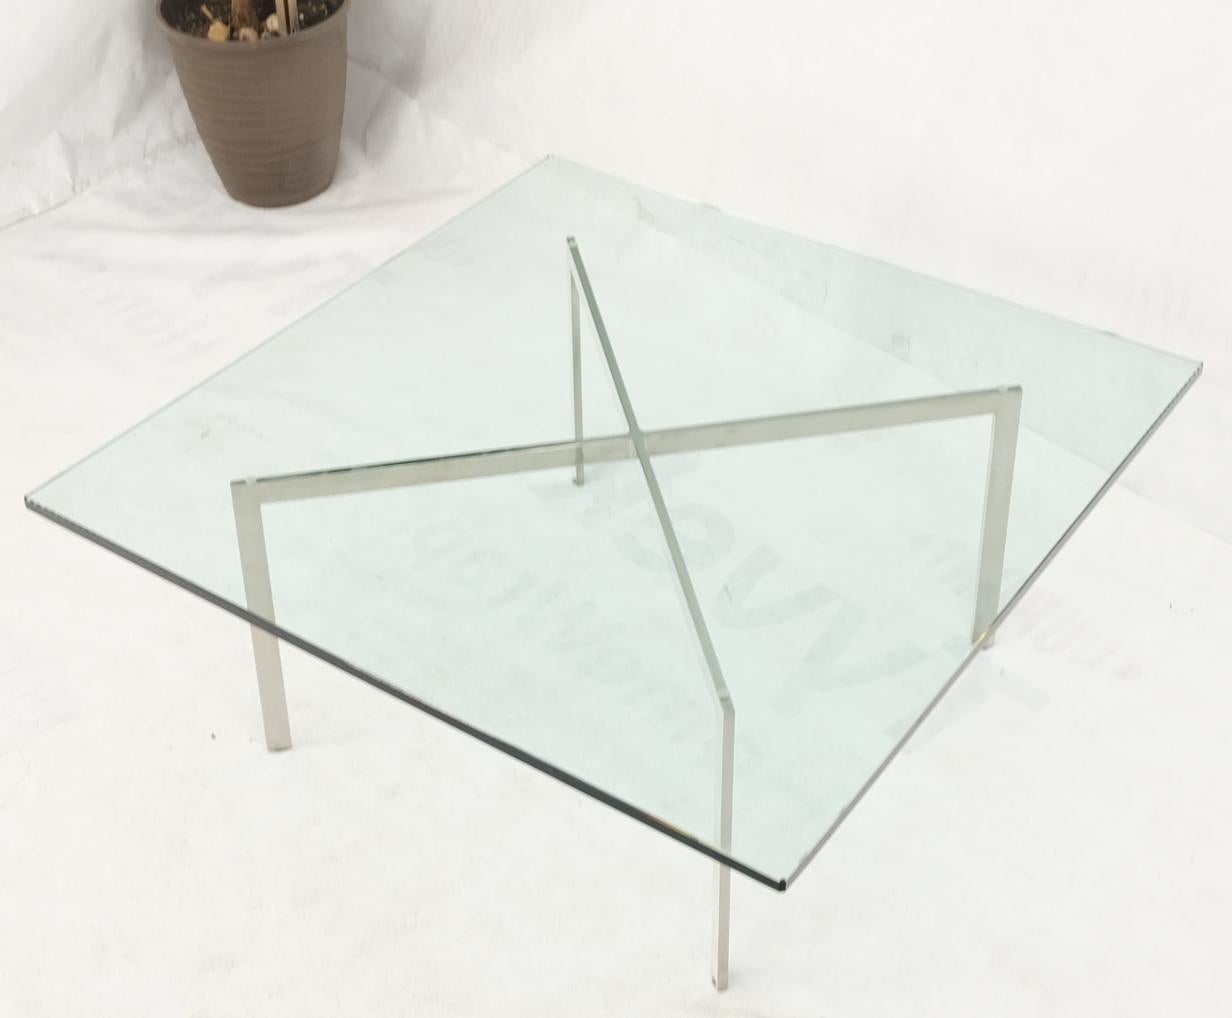 Square Glass top Stainless Steel Base Barcelona Coffee Table Bauhaus Style In Good Condition For Sale In Rockaway, NJ